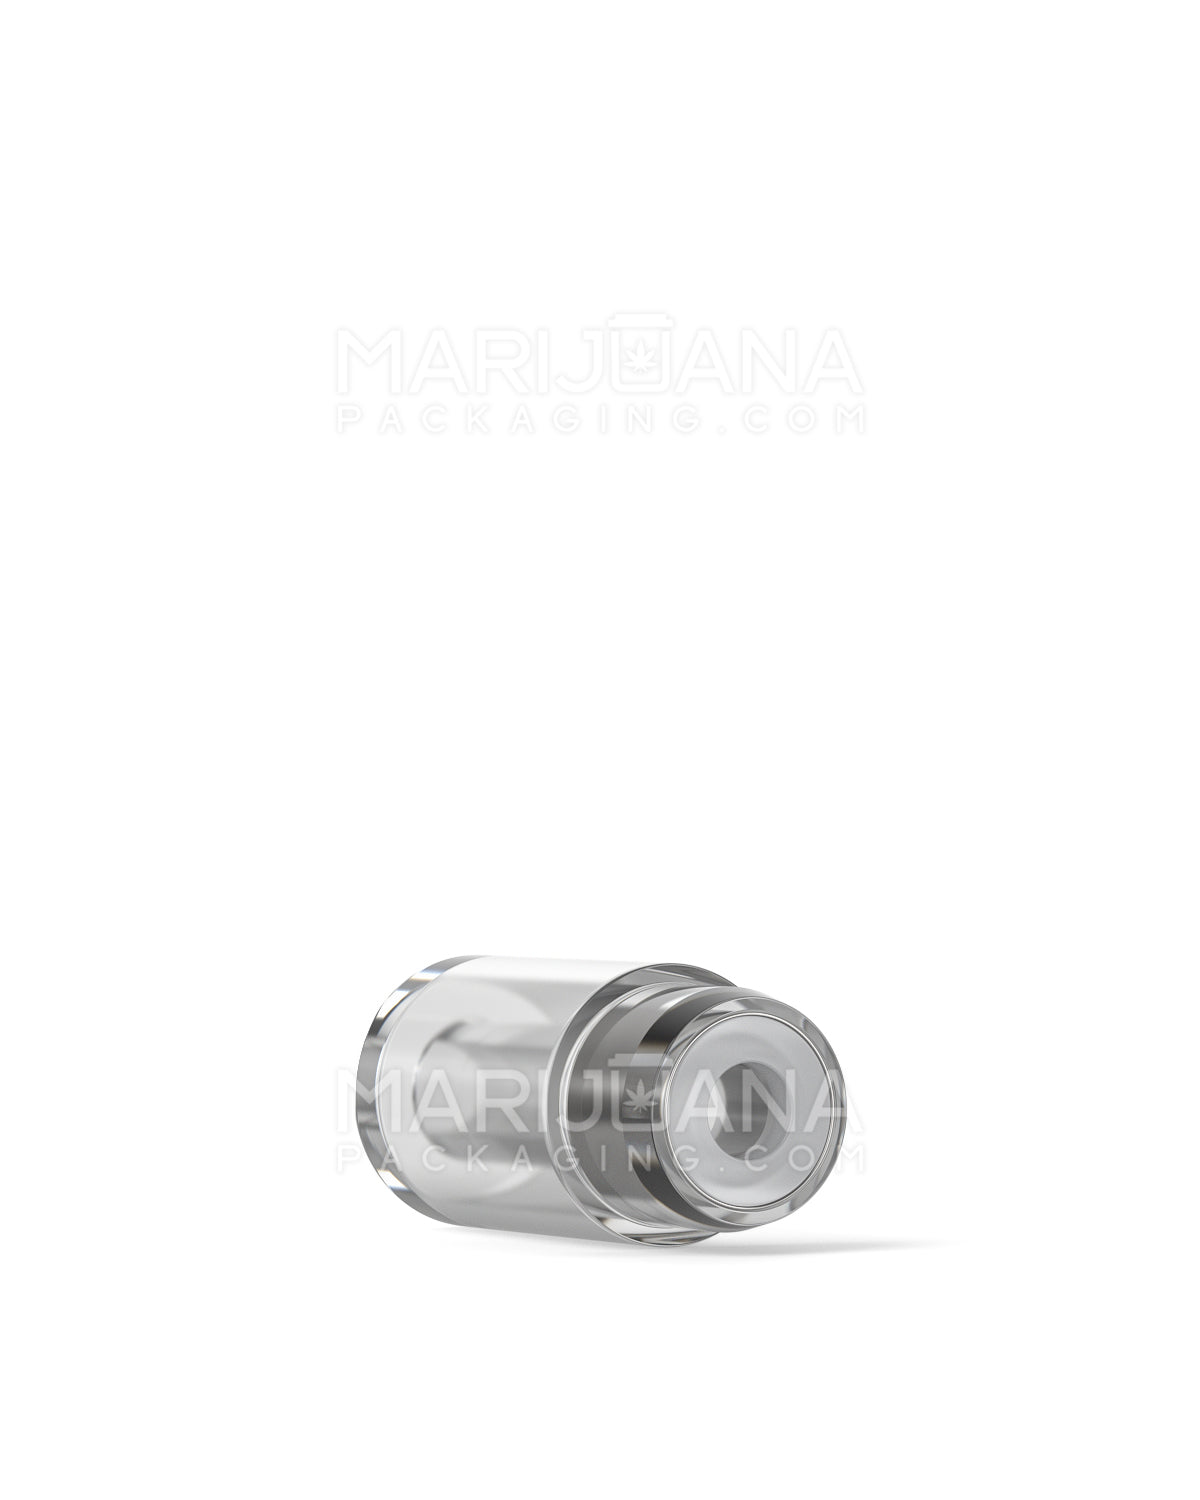 AVD | Round Vape Mouthpiece for Plastic Cartridges | Clear Plastic - Press On - 600 Count - 6